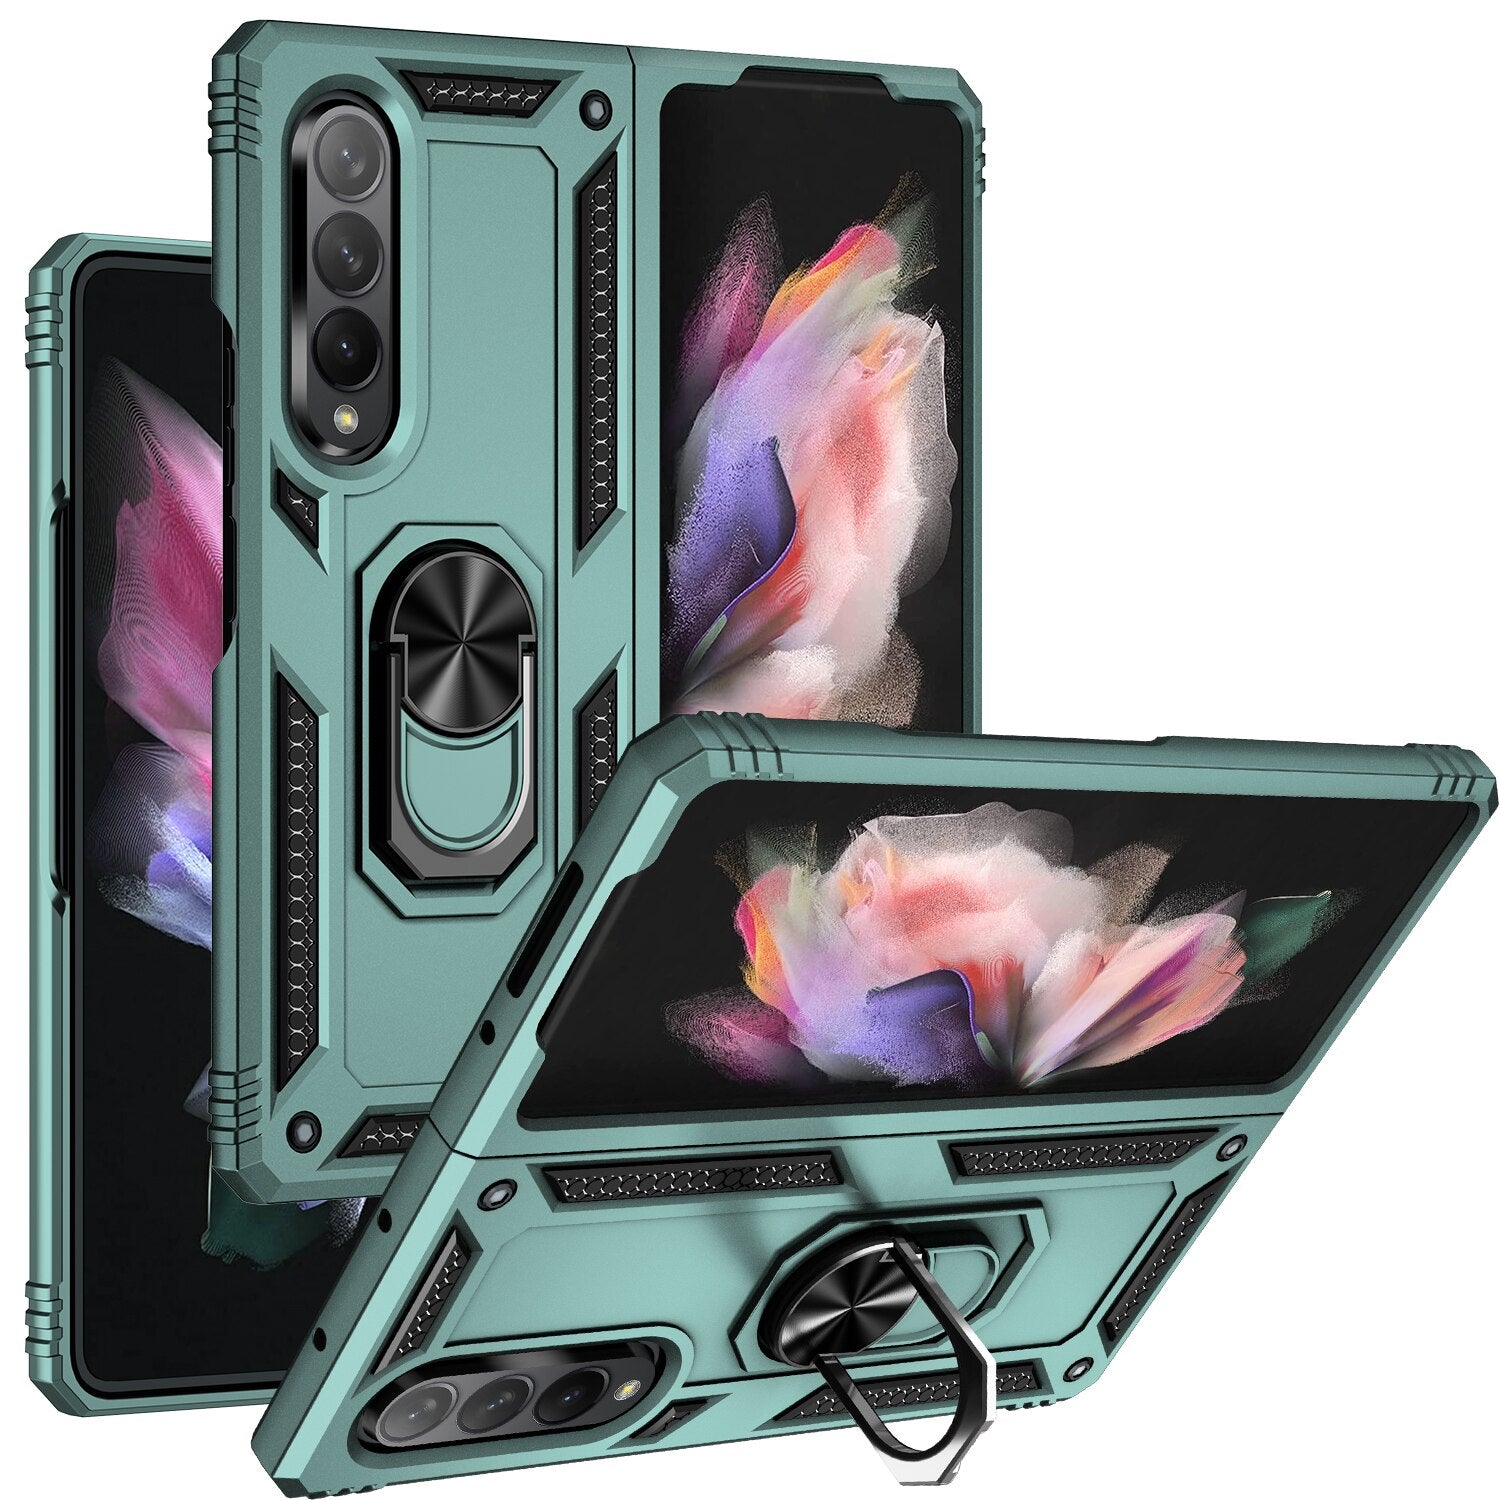 Case for Samsung Galaxy Z Fold 4 Fold 3, with Finger Ring Holder Kickstand, Military Grade Stand Cover Phone Cases for Z Fold4 - 0 Z Fold 3 / Green / United States Find Epic Store